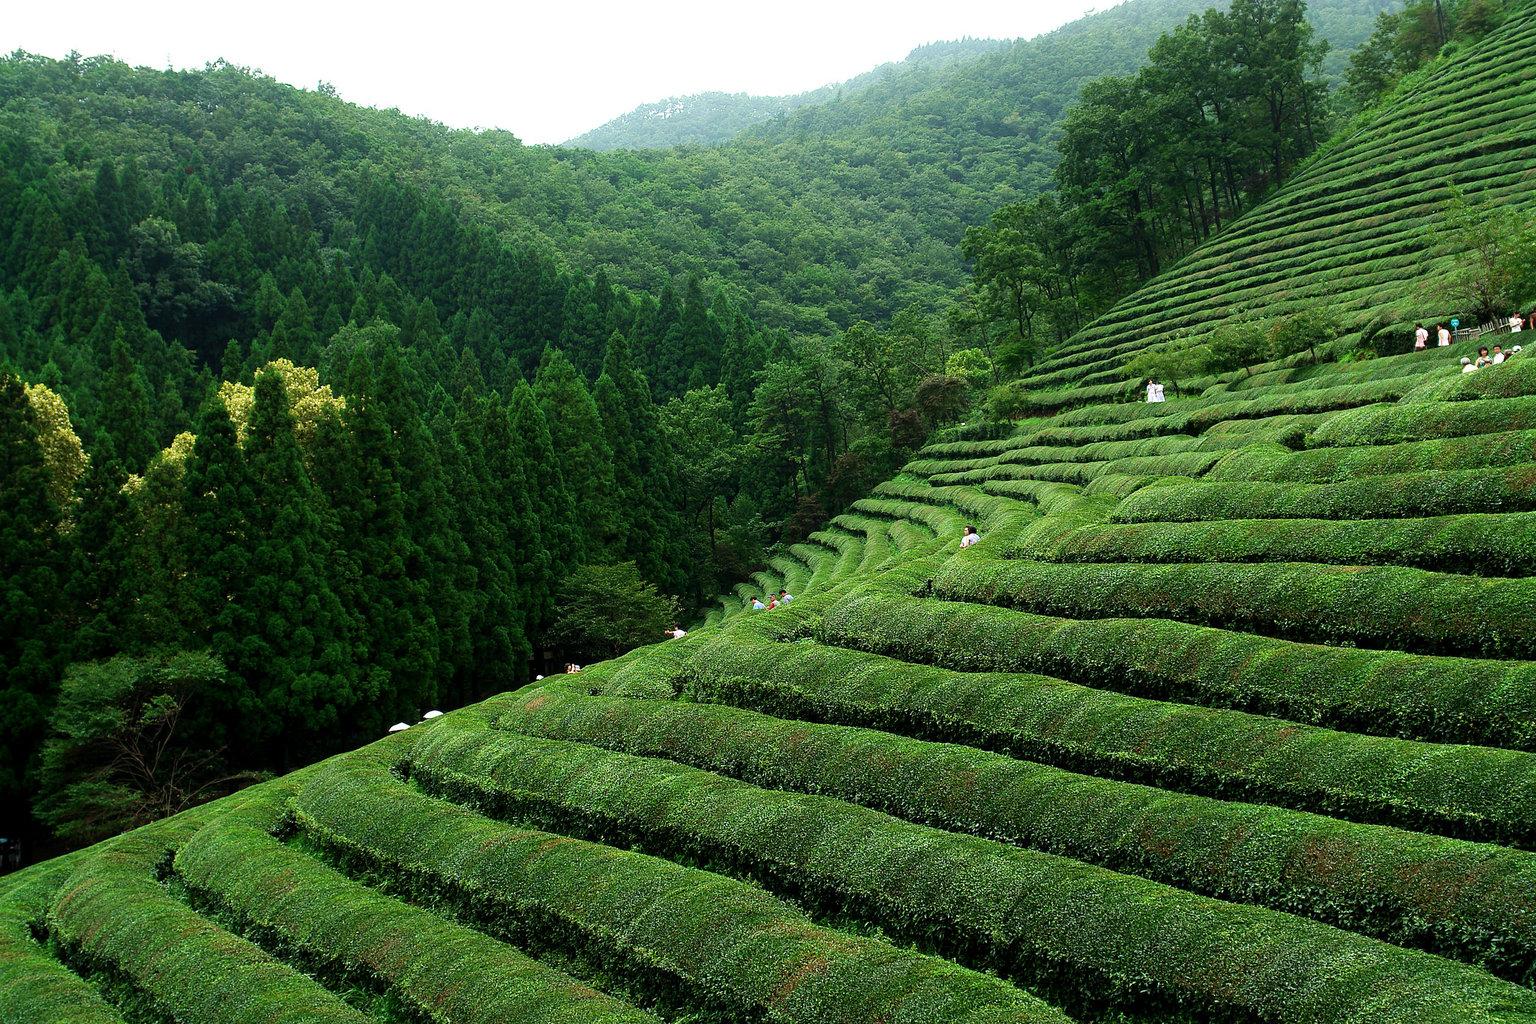 Stunning Picture of South Korea's Tea Plantations